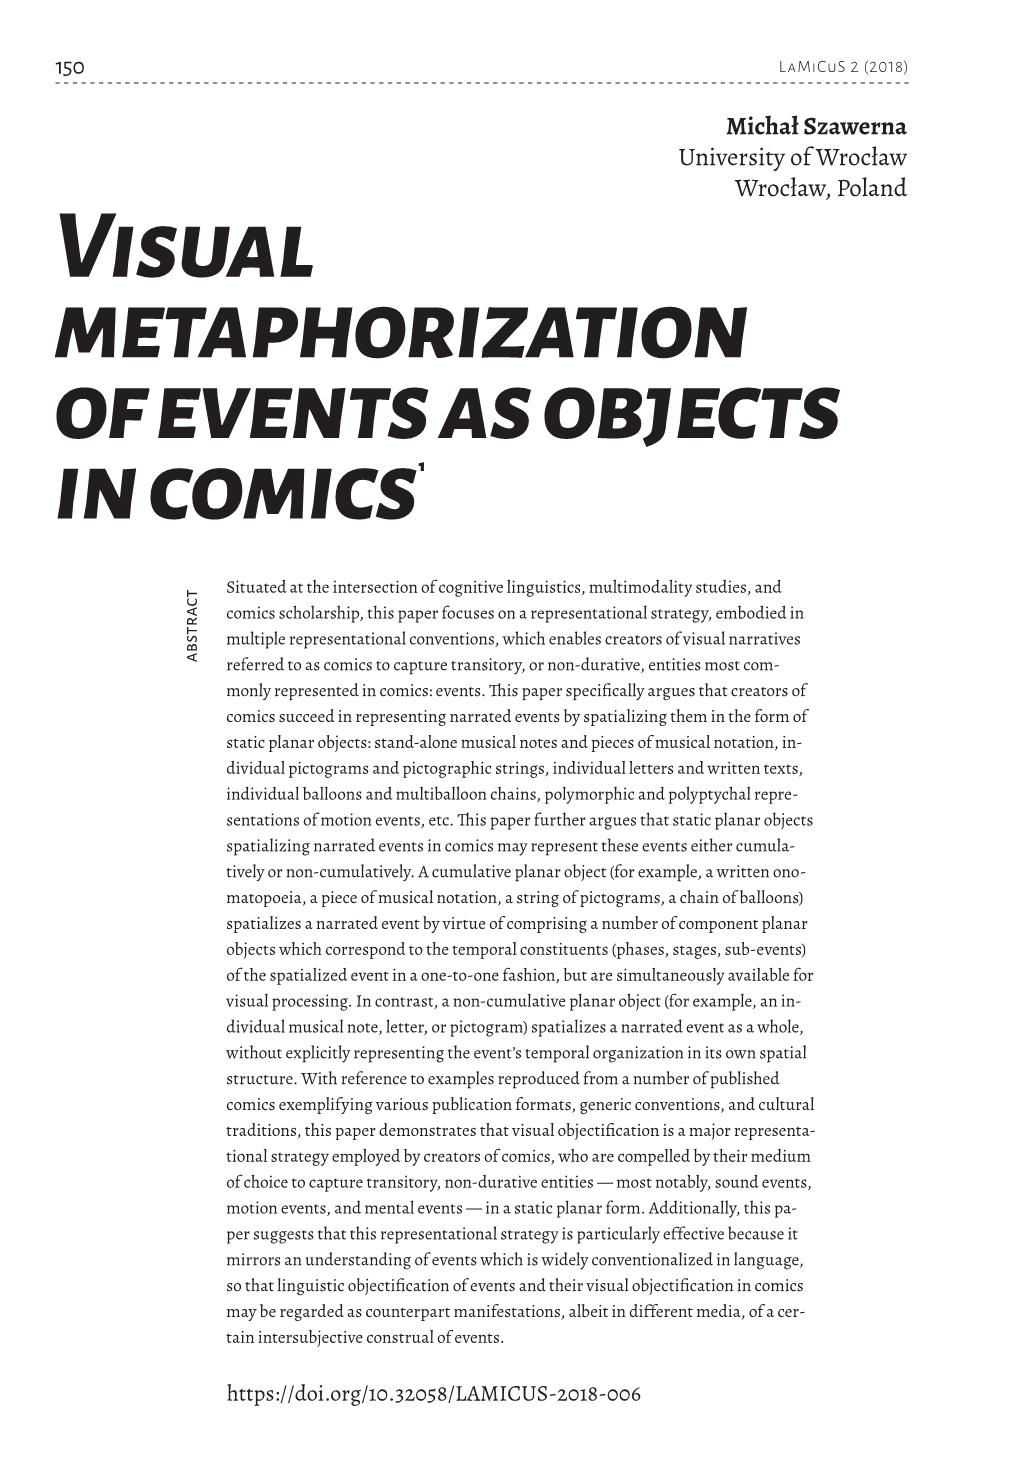 Visual Metaphorization of Events As Objects in Comics1